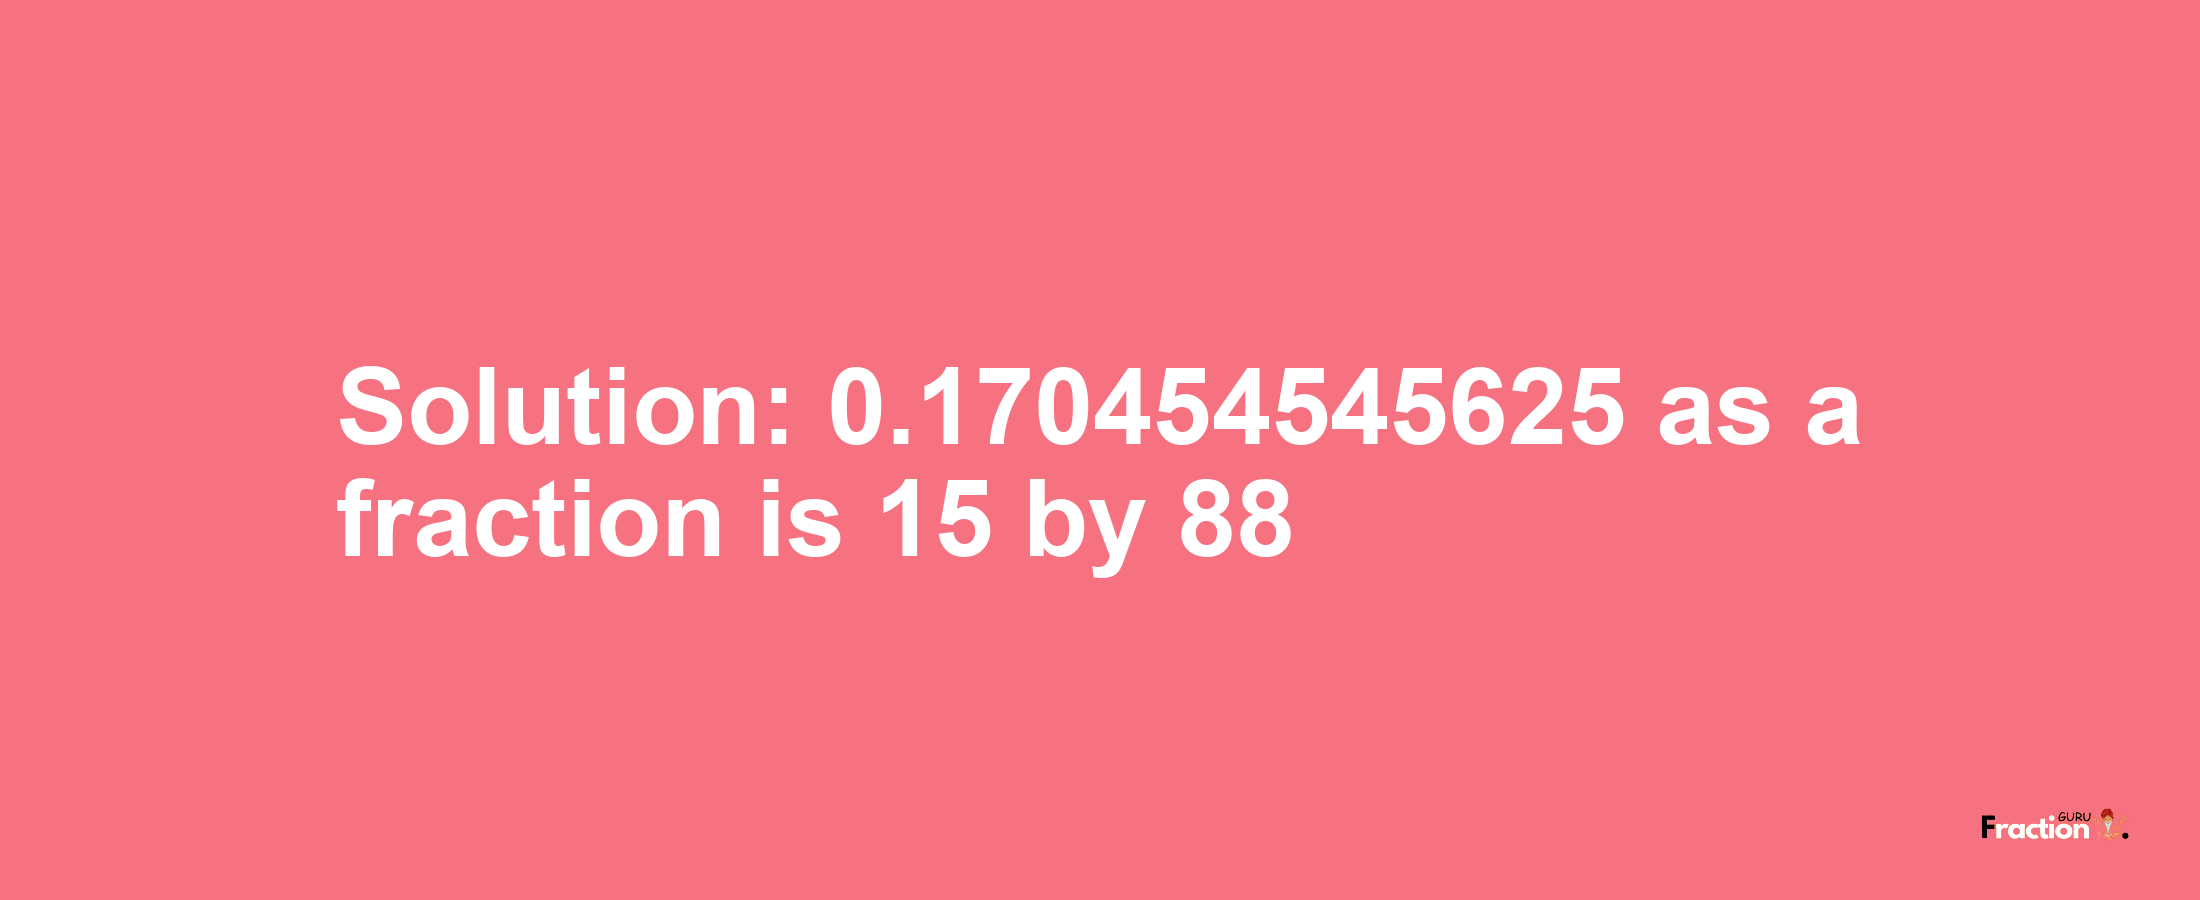 Solution:0.170454545625 as a fraction is 15/88